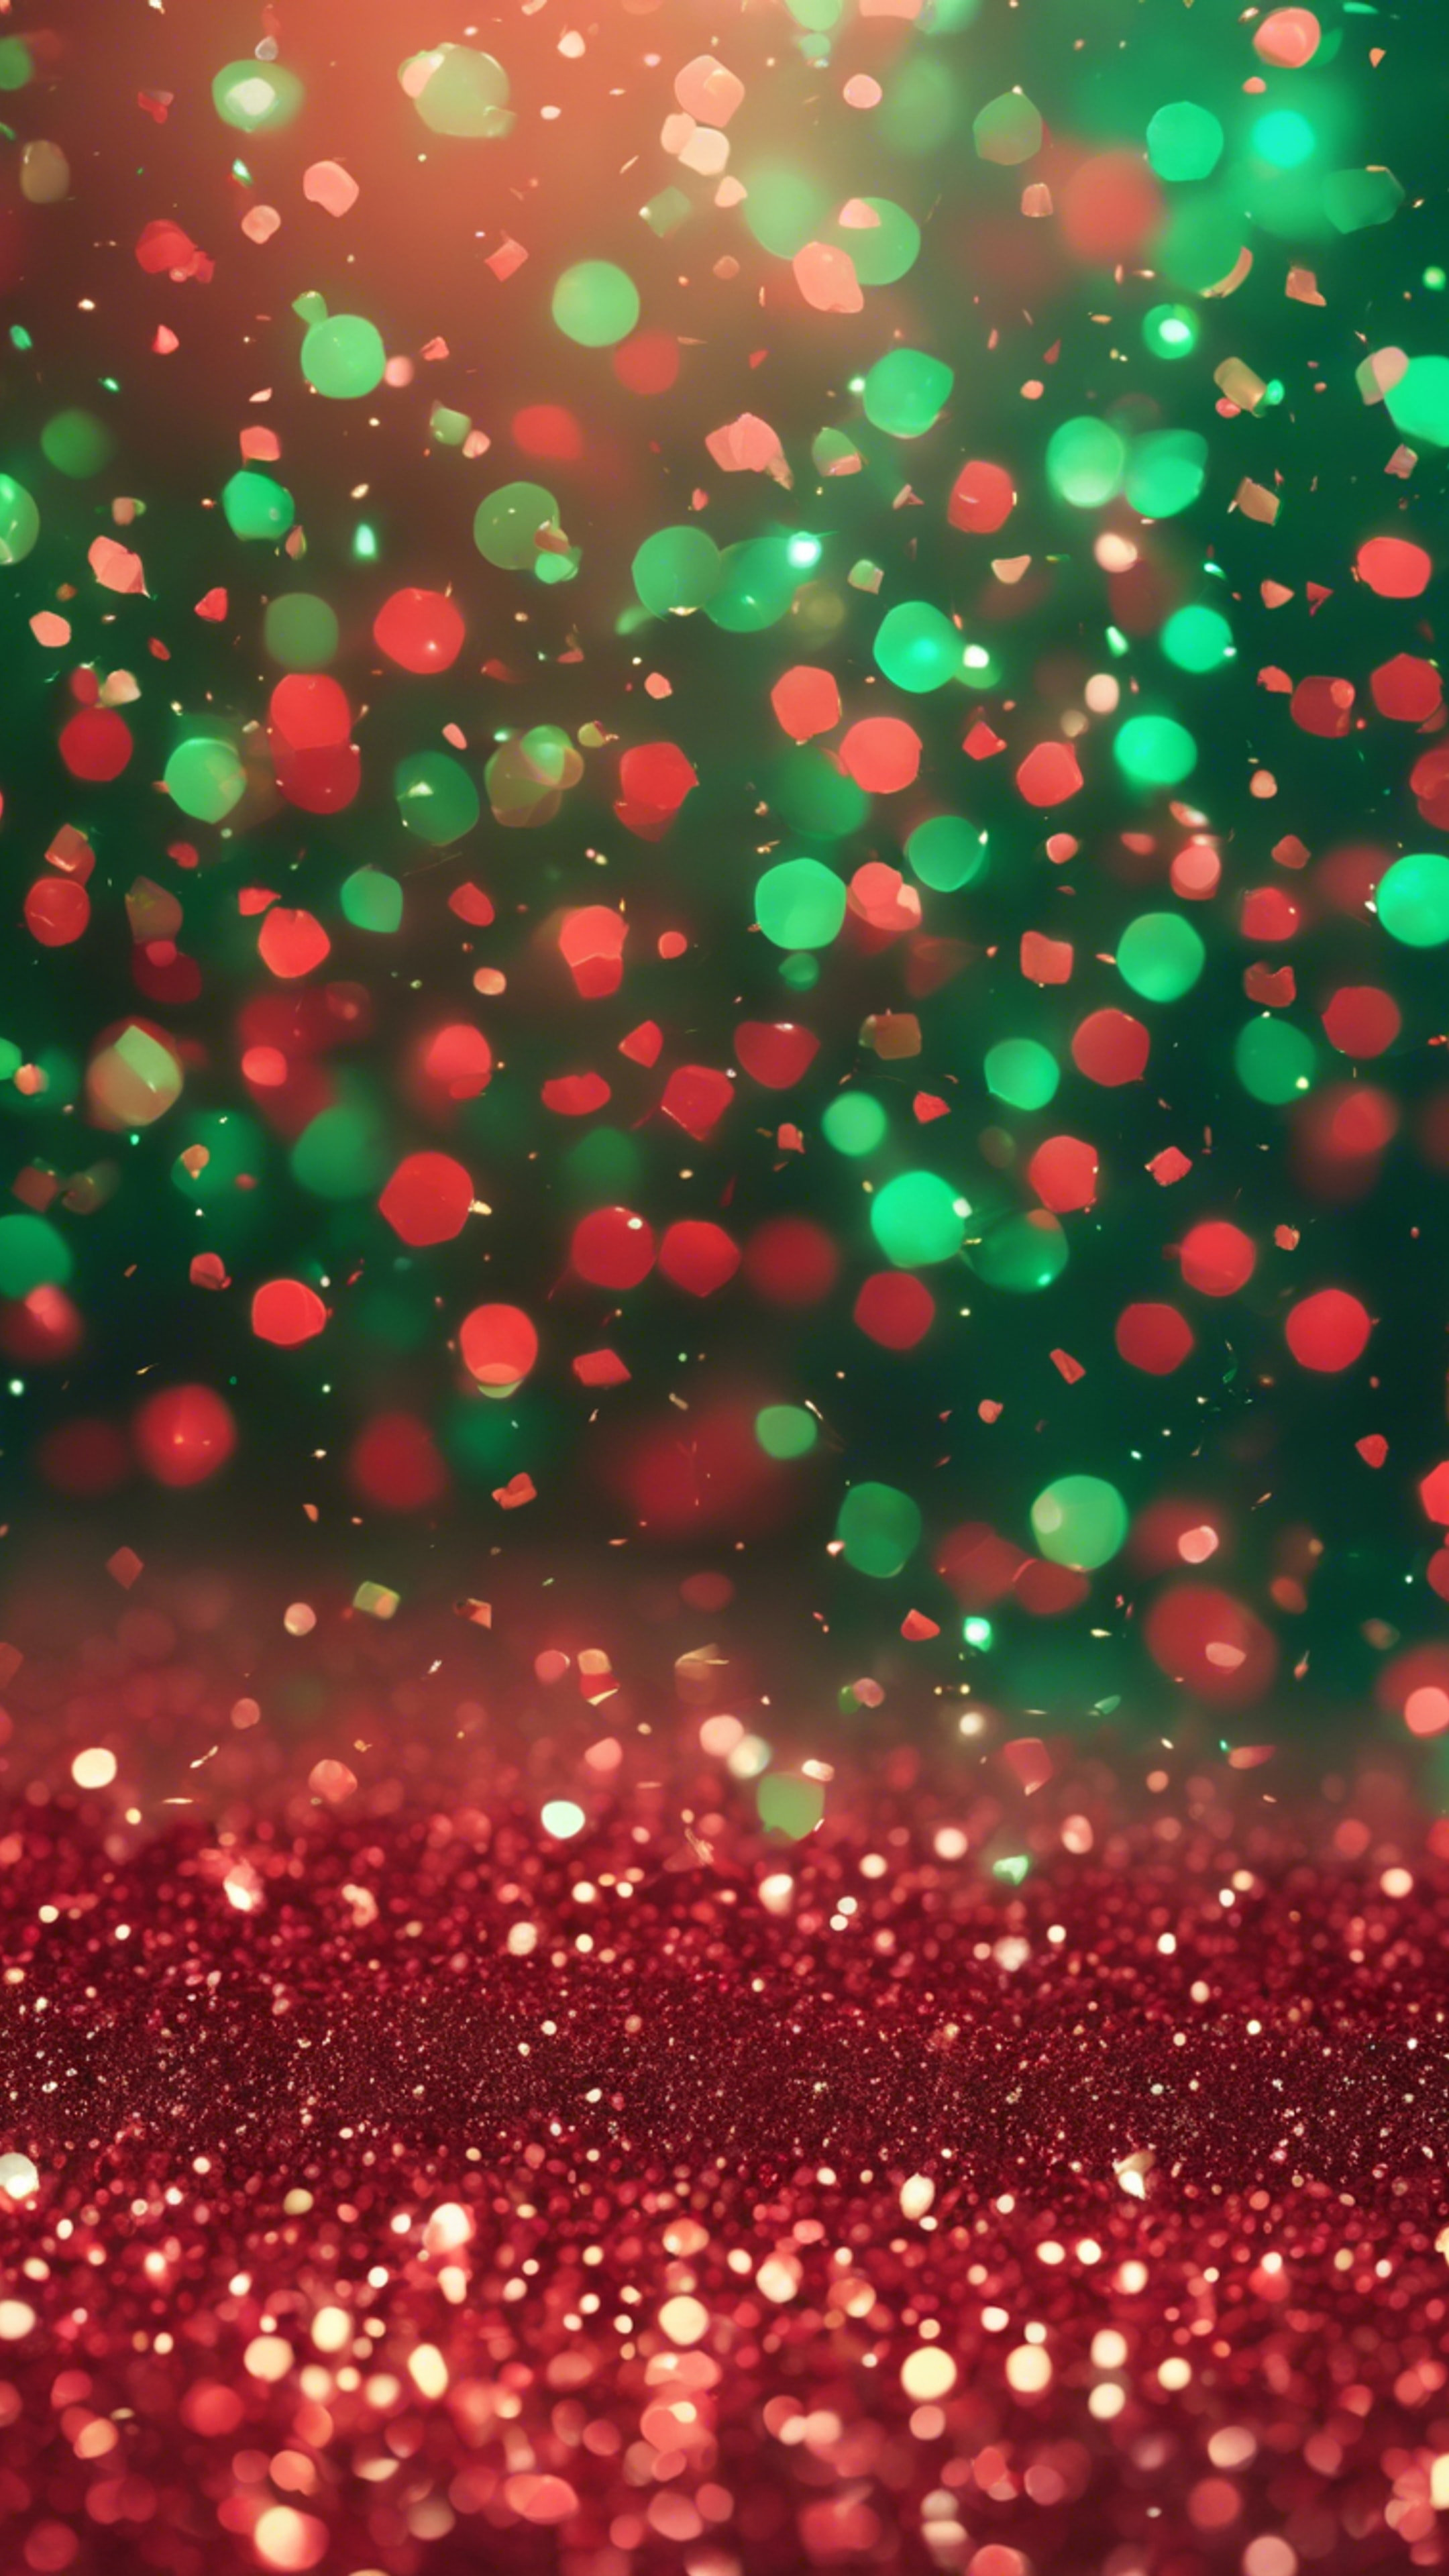 A seamless pattern of red and green glitter sparkles 벽지[5d1121e27deb4297acdf]